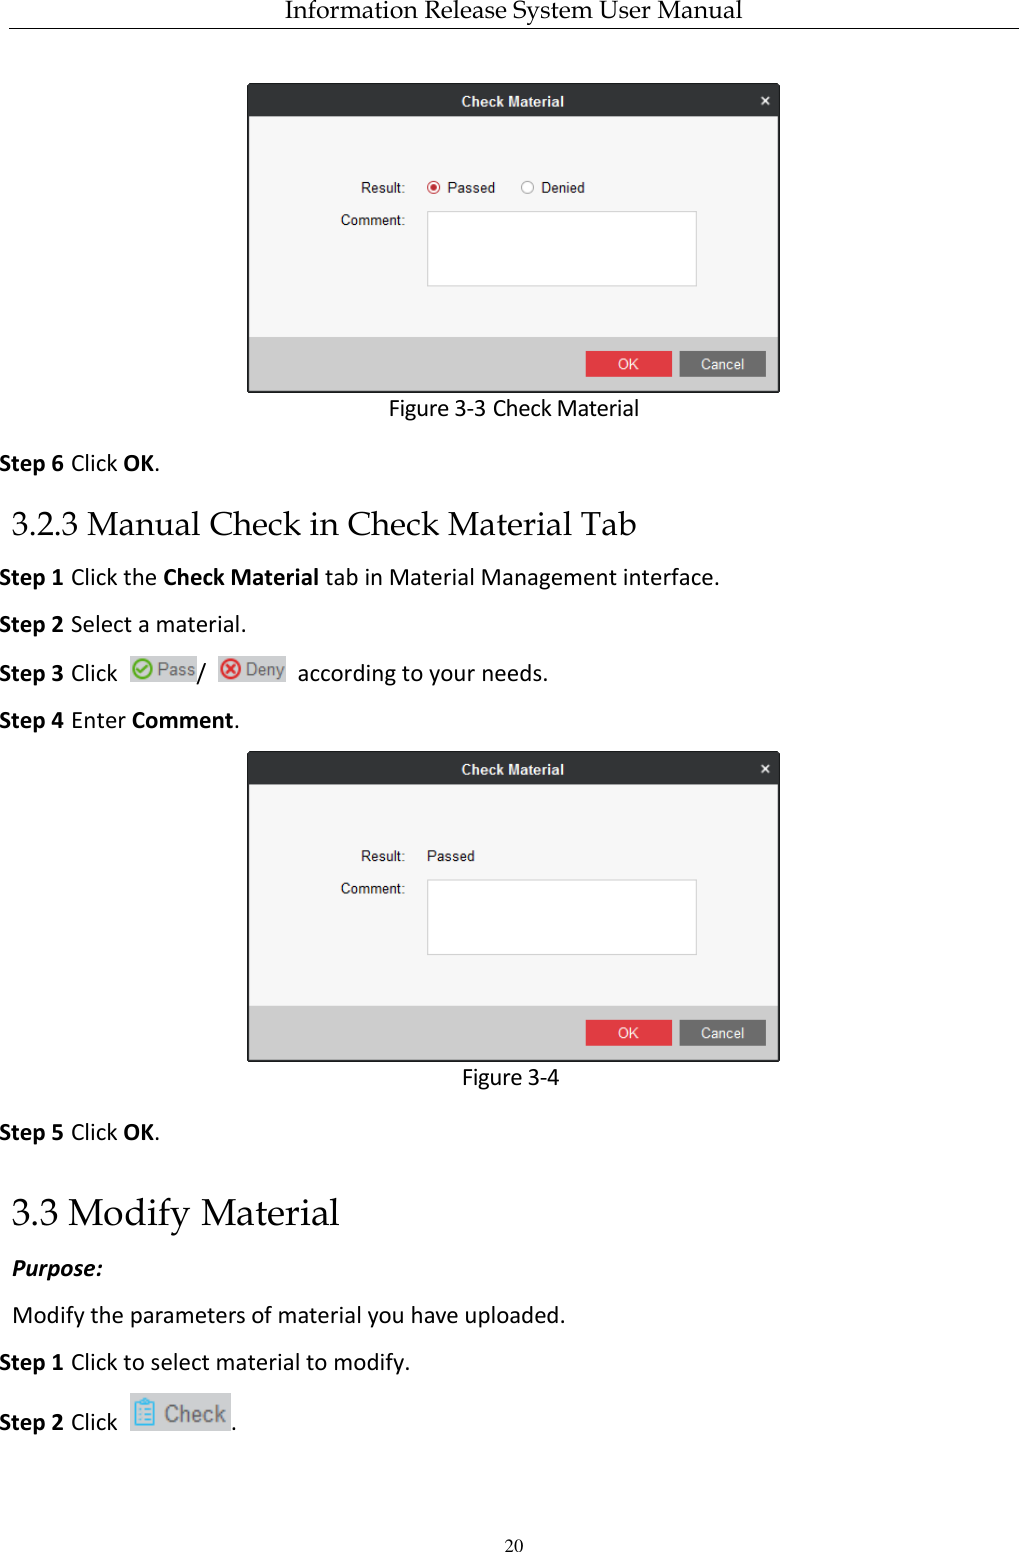 Information Release System User Manual 20  Figure 3-3 Check Material Step 6 Click OK.   3.2.3 Manual Check in Check Material Tab Step 1 Click the Check Material tab in Material Management interface. Step 2 Select a material. Step 3 Click  /    according to your needs. Step 4 Enter Comment.  Figure 3-4  Step 5 Click OK. 3.3 Modify Material Purpose: Modify the parameters of material you have uploaded. Step 1 Click to select material to modify. Step 2 Click  . 